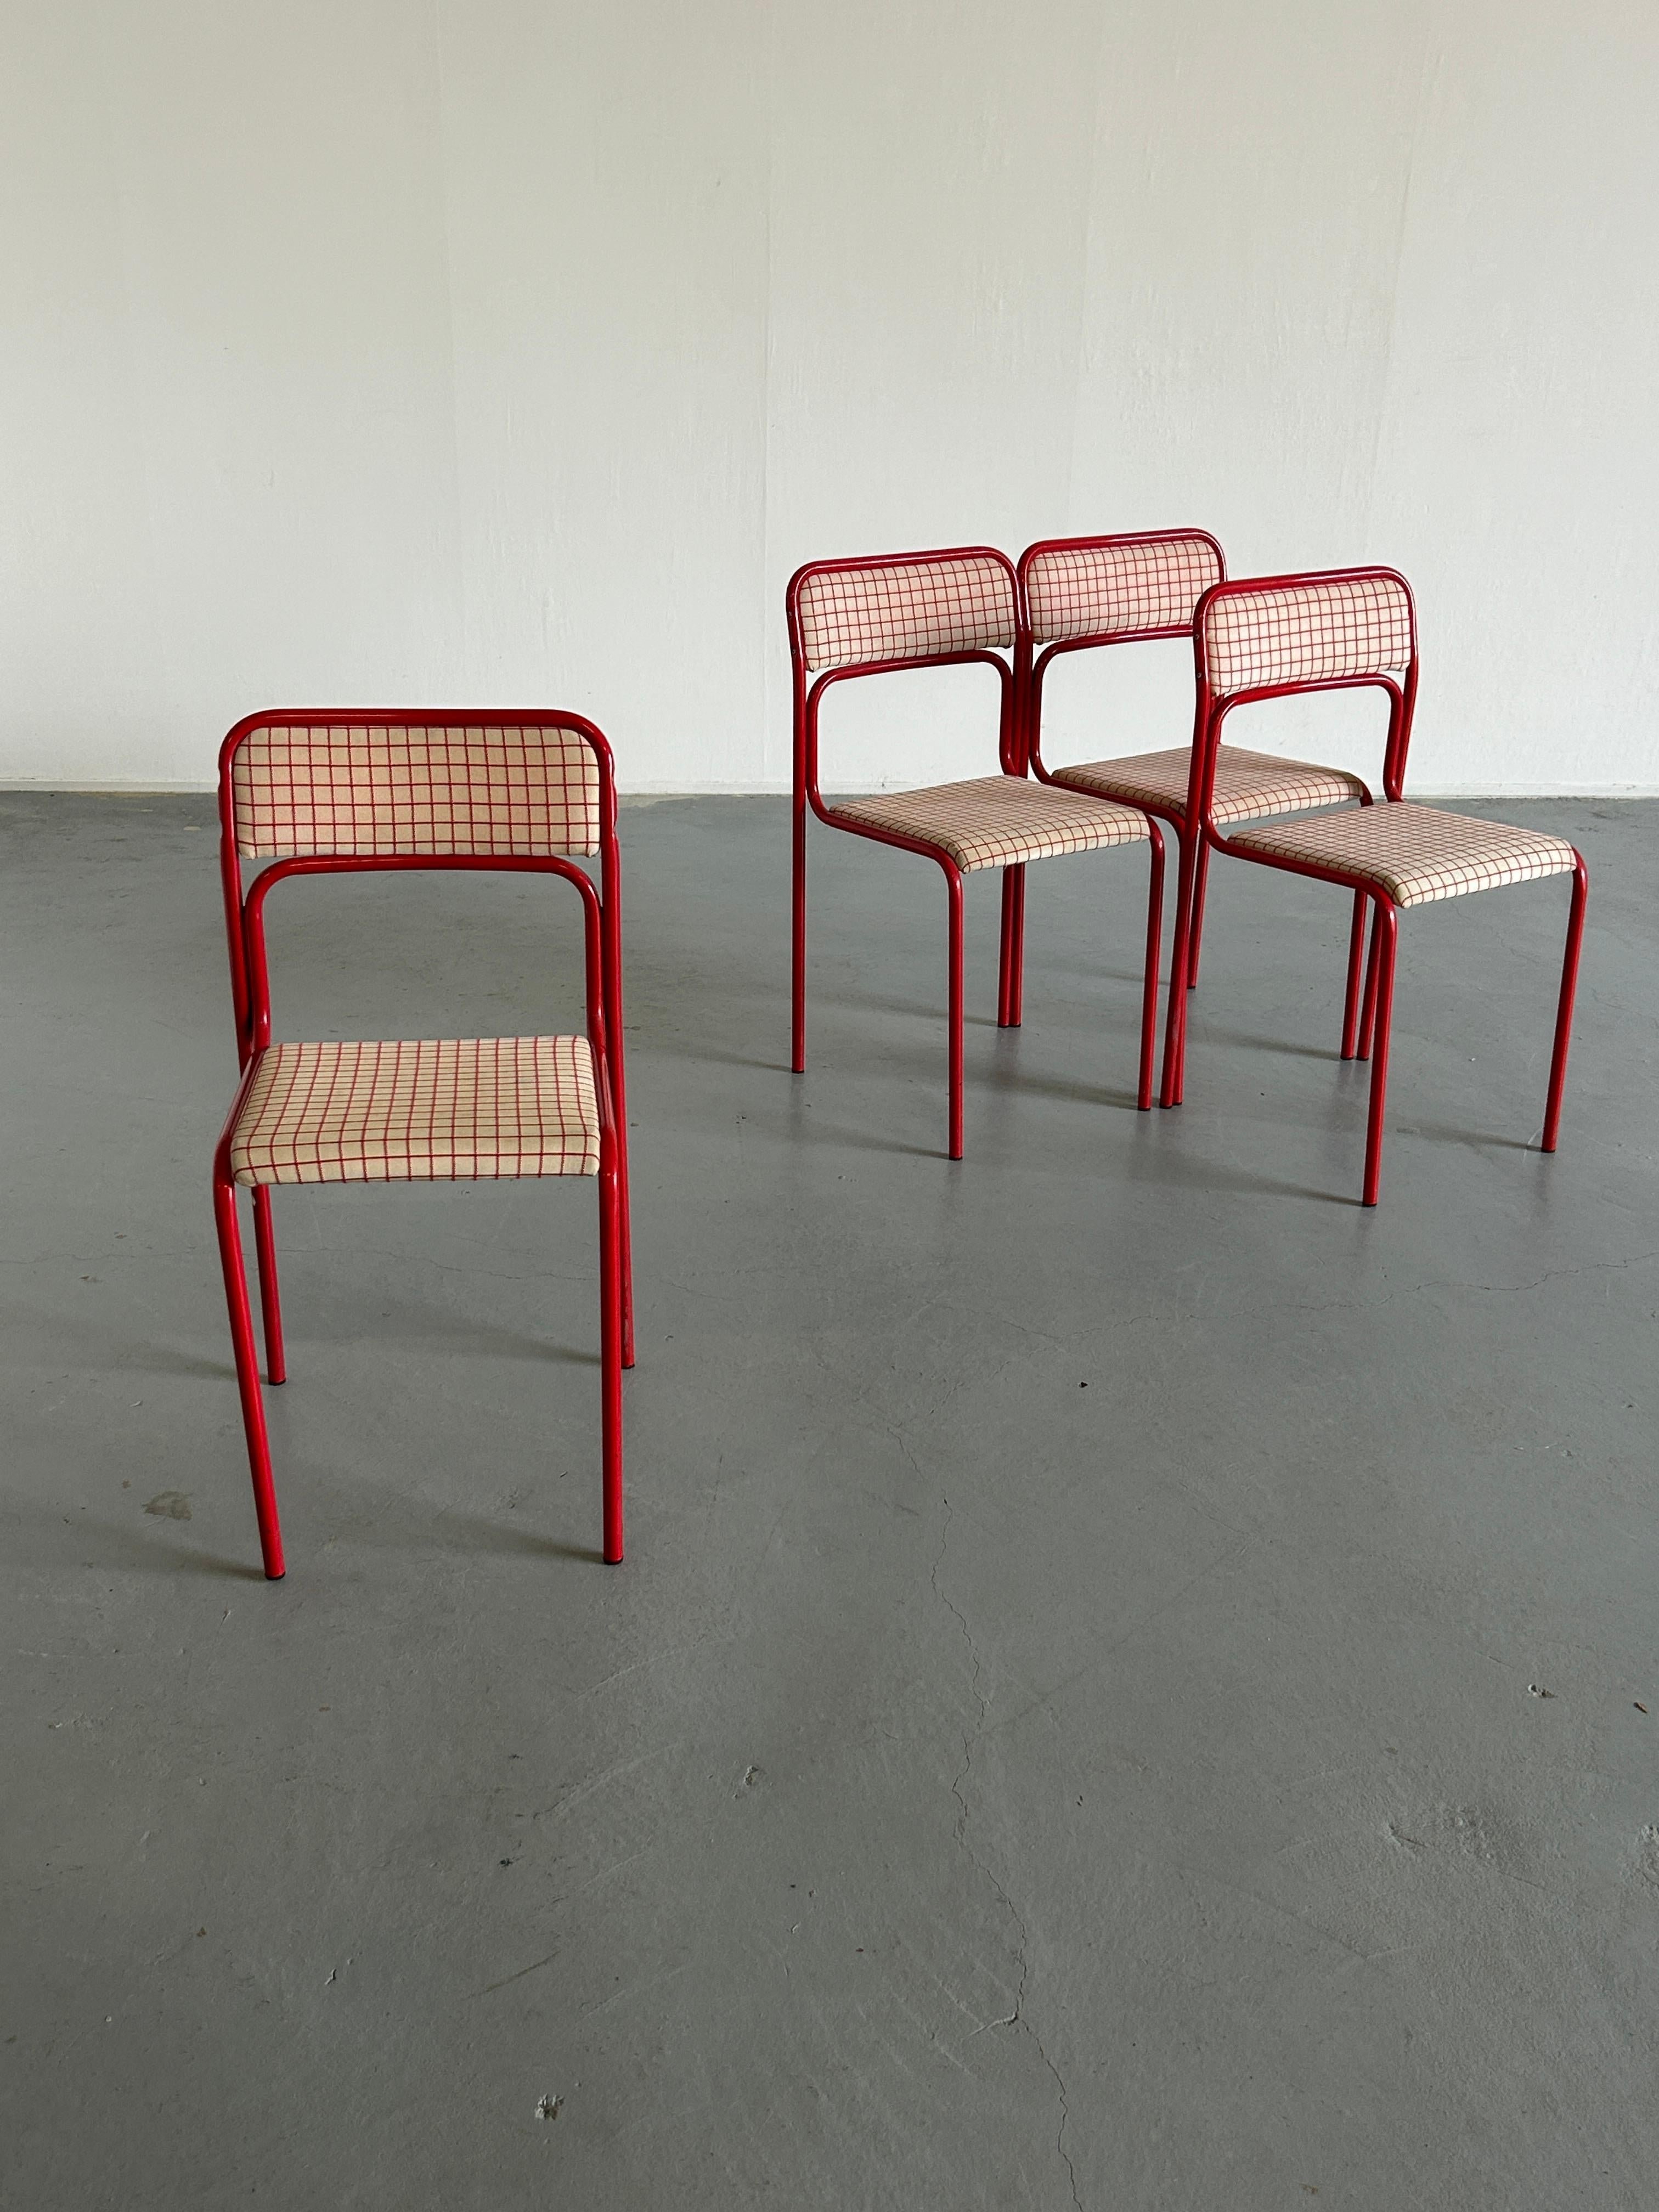 Late 20th Century Set of 4 Pop-Art Syle Tubular Steel Checkered Red Upholstery Chairs, 80s Italy